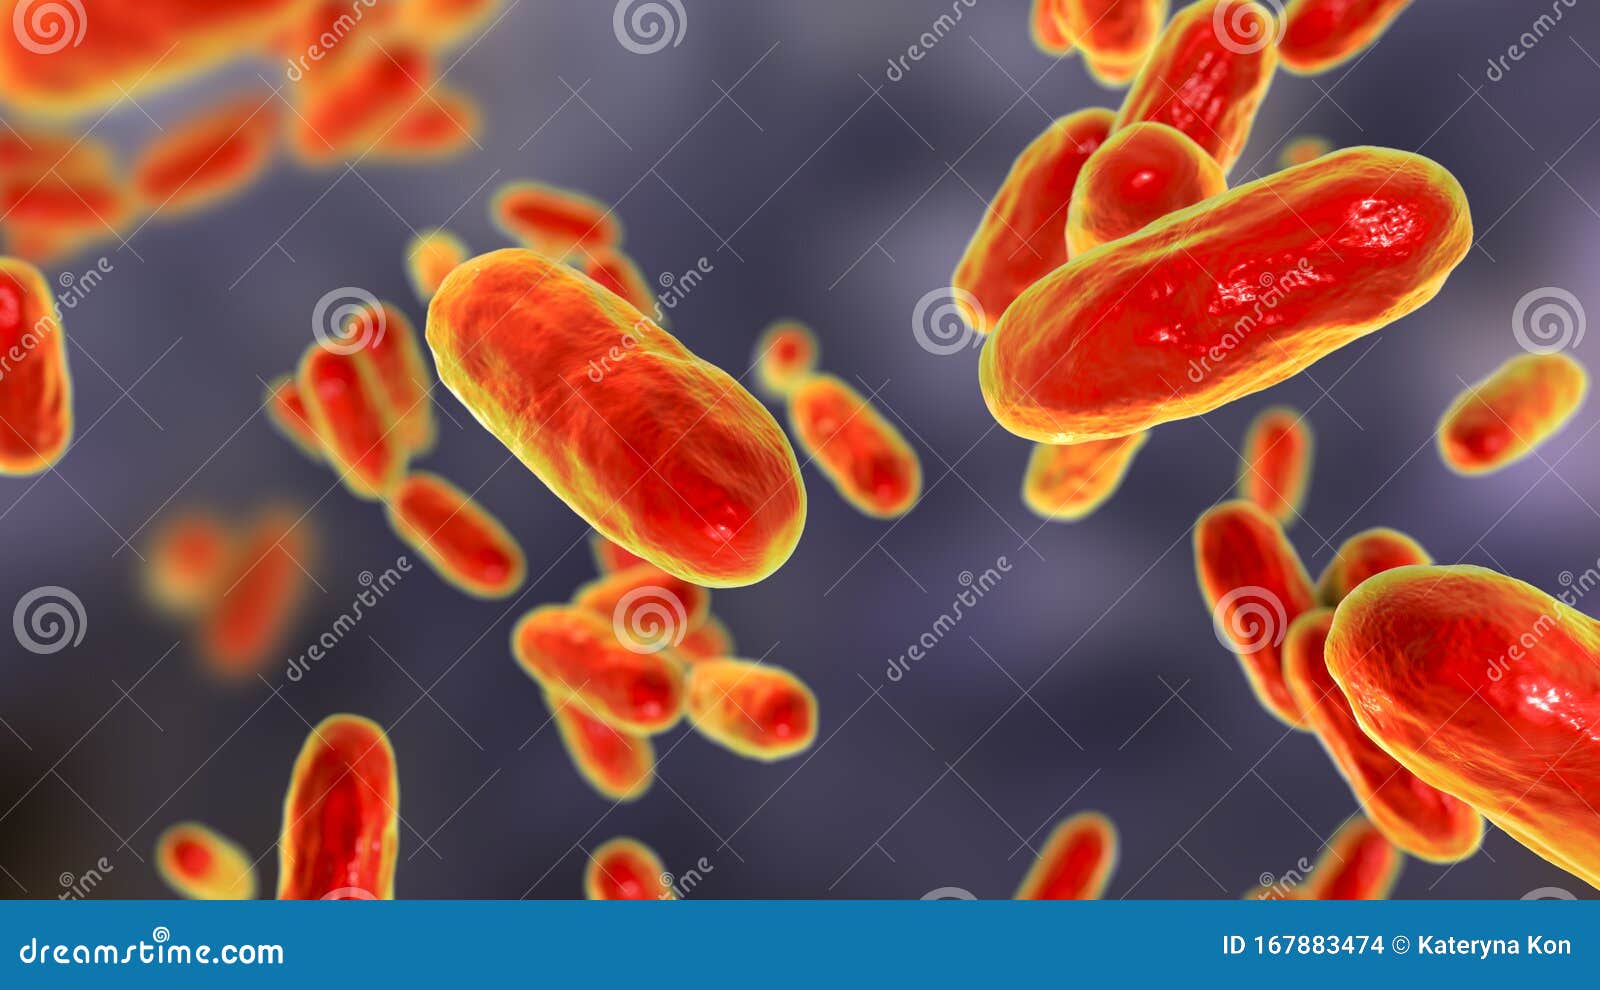 Bacteria Bordetella Pertussis, the Causative Agent of Whooping Cough